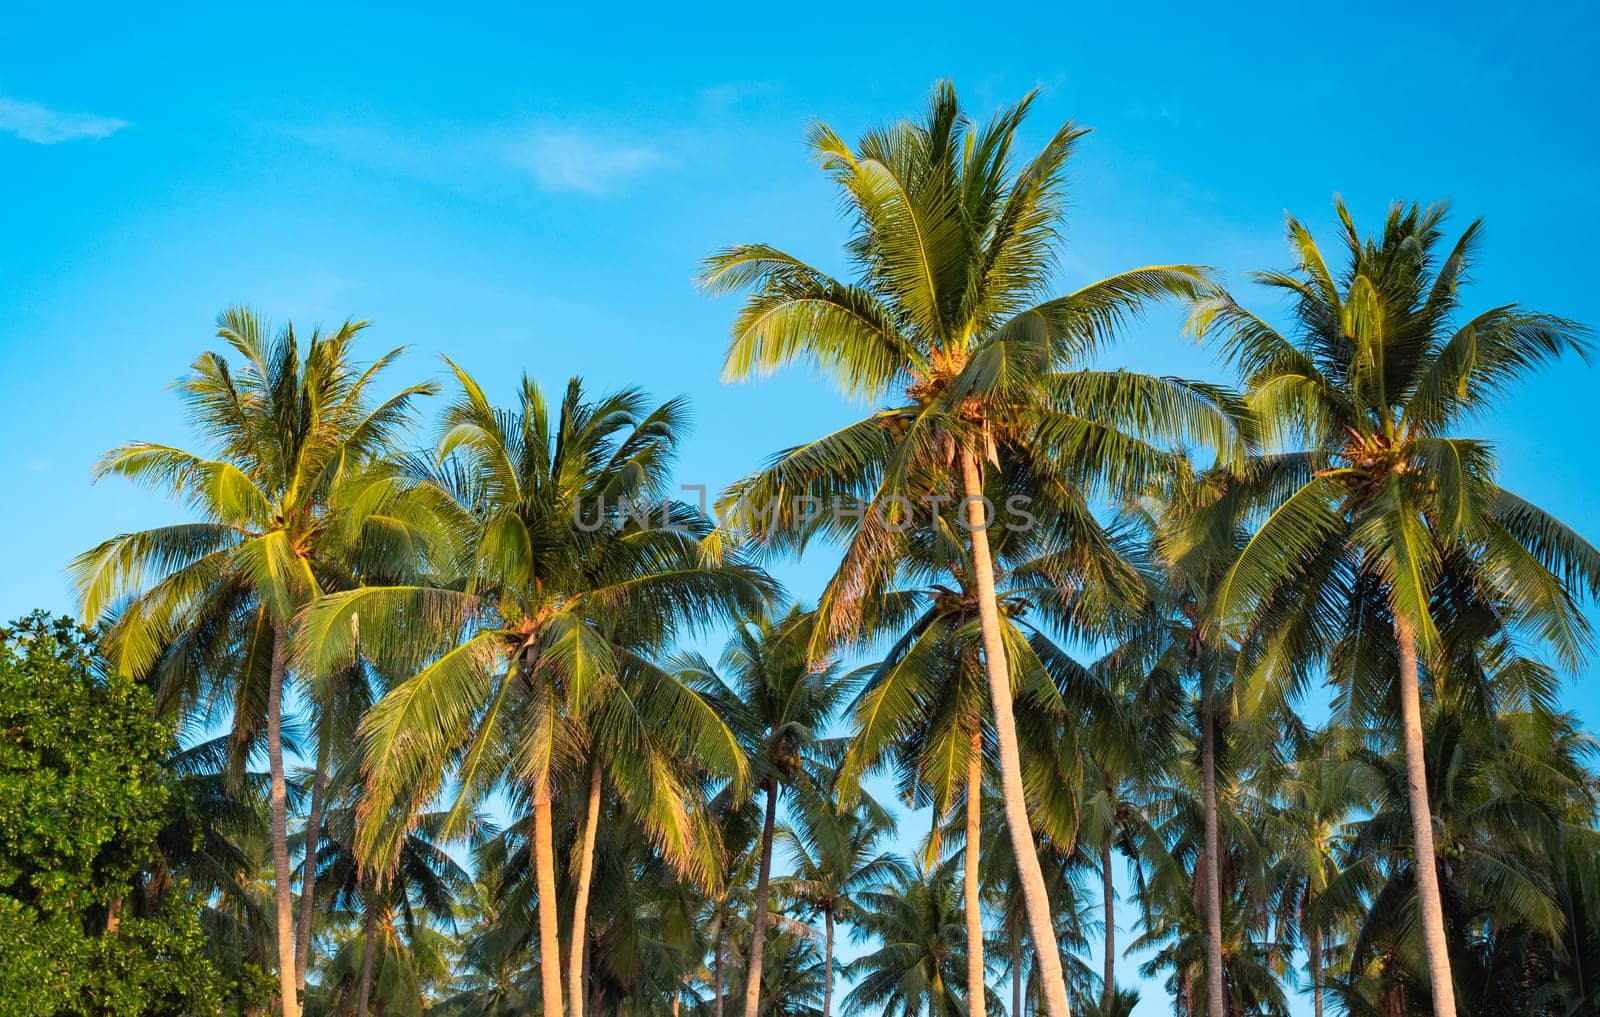 Bottom view of palm trees against a beautiful blue sky. Green palm tree on blue sky background. View of palm trees against sky. Palm tree in gentle tropical breeze.